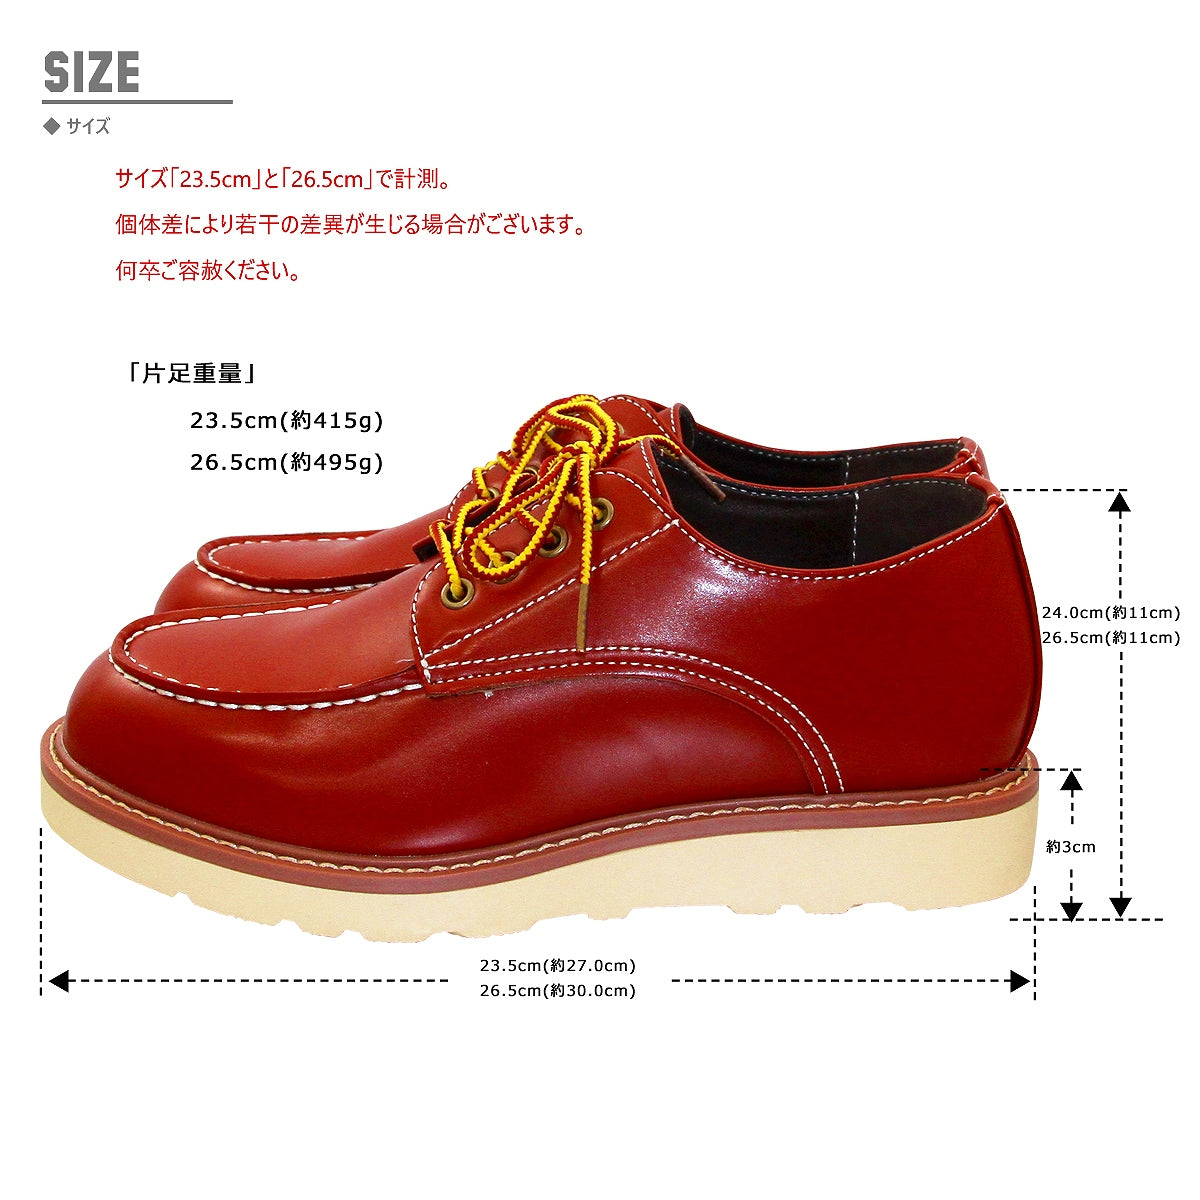 [GOD&amp;BLESS] Work boots LO cut black/red brown boots BIG size GB-7820